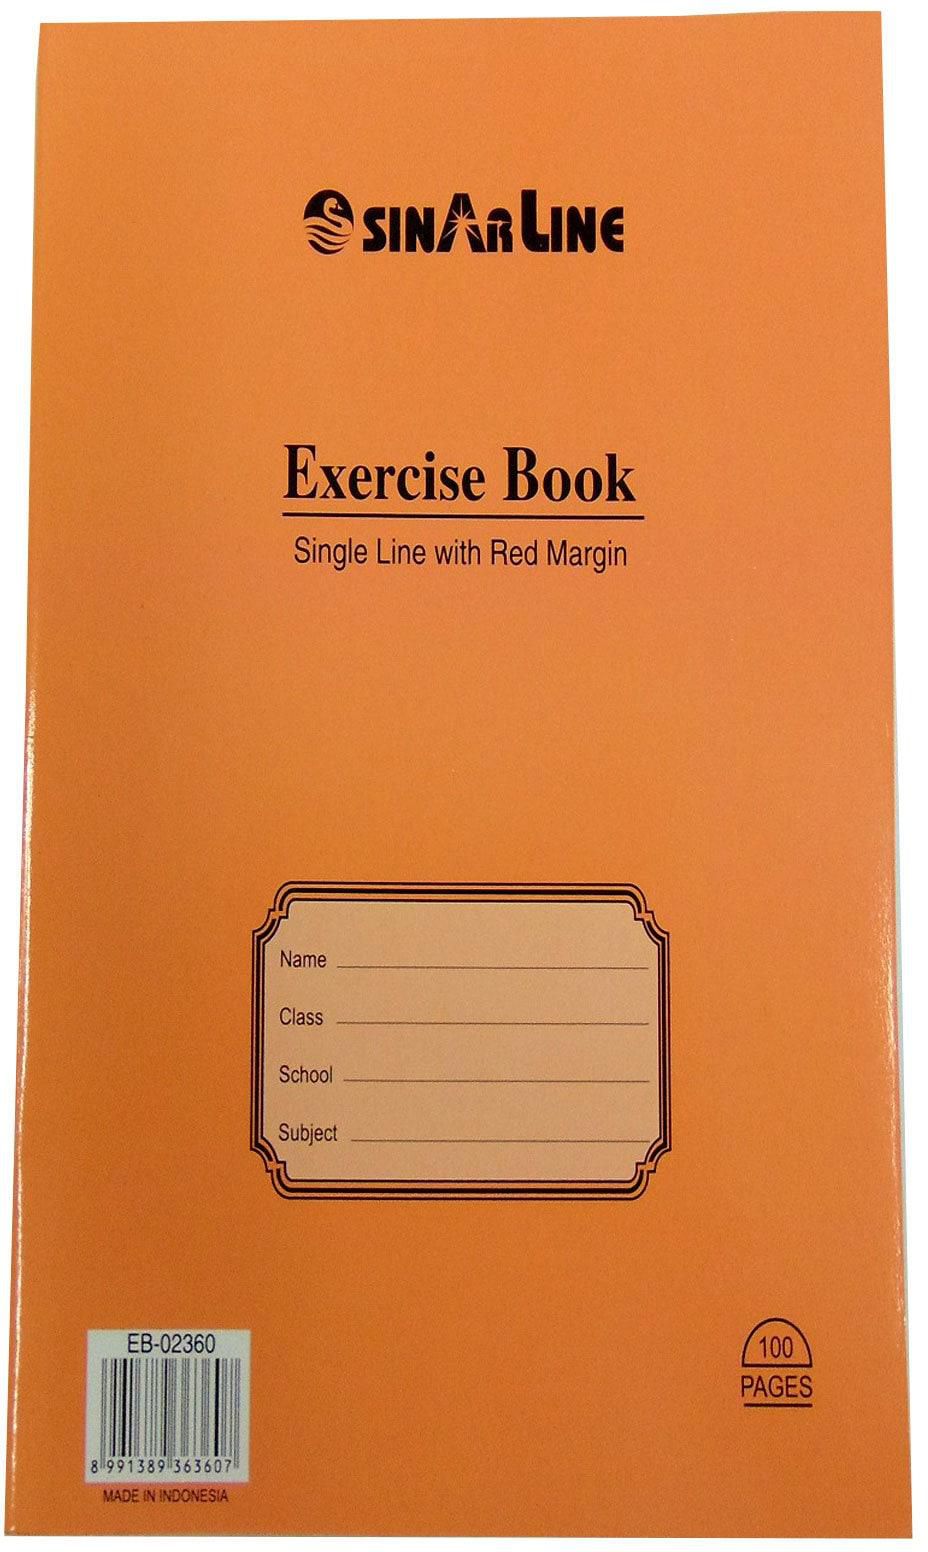 Sinarline Single Lined with Red Margin Exercise Book 100 Sheets Orange